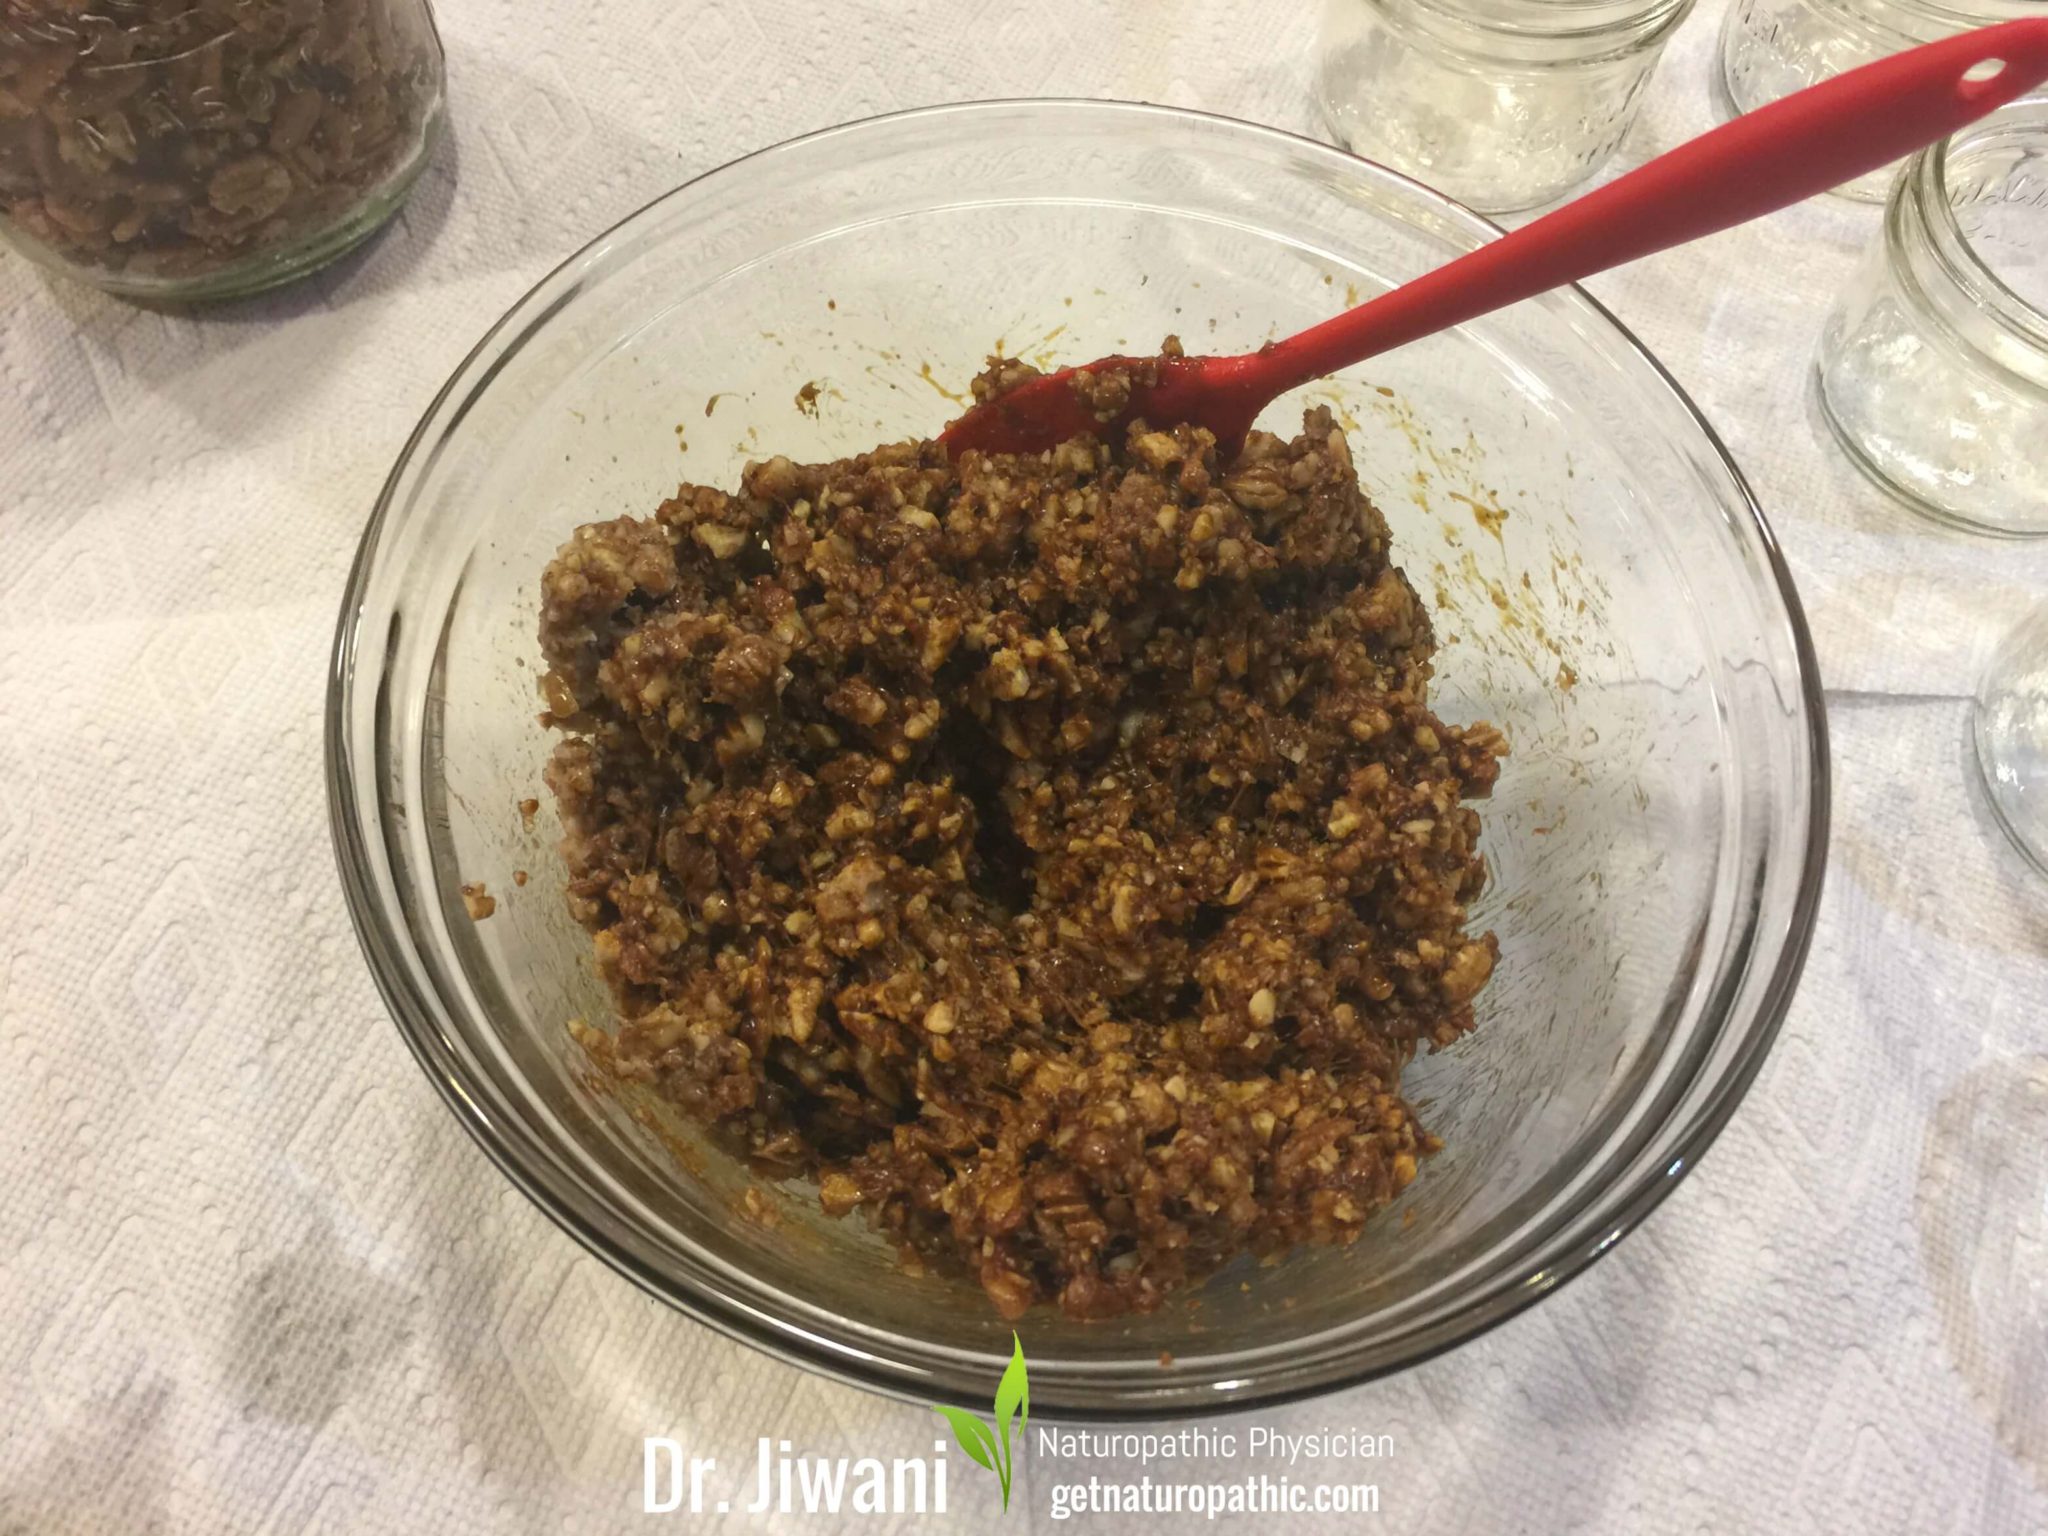 Dr. Jiwani's No Bake Pie Crust is Yummy, Low Carb, Gluten-Free, Egg-Free, Dairy-Free, Soy-Free, Corn-Free, Ideal For Paleo, Keto & Allergy-Free Diets